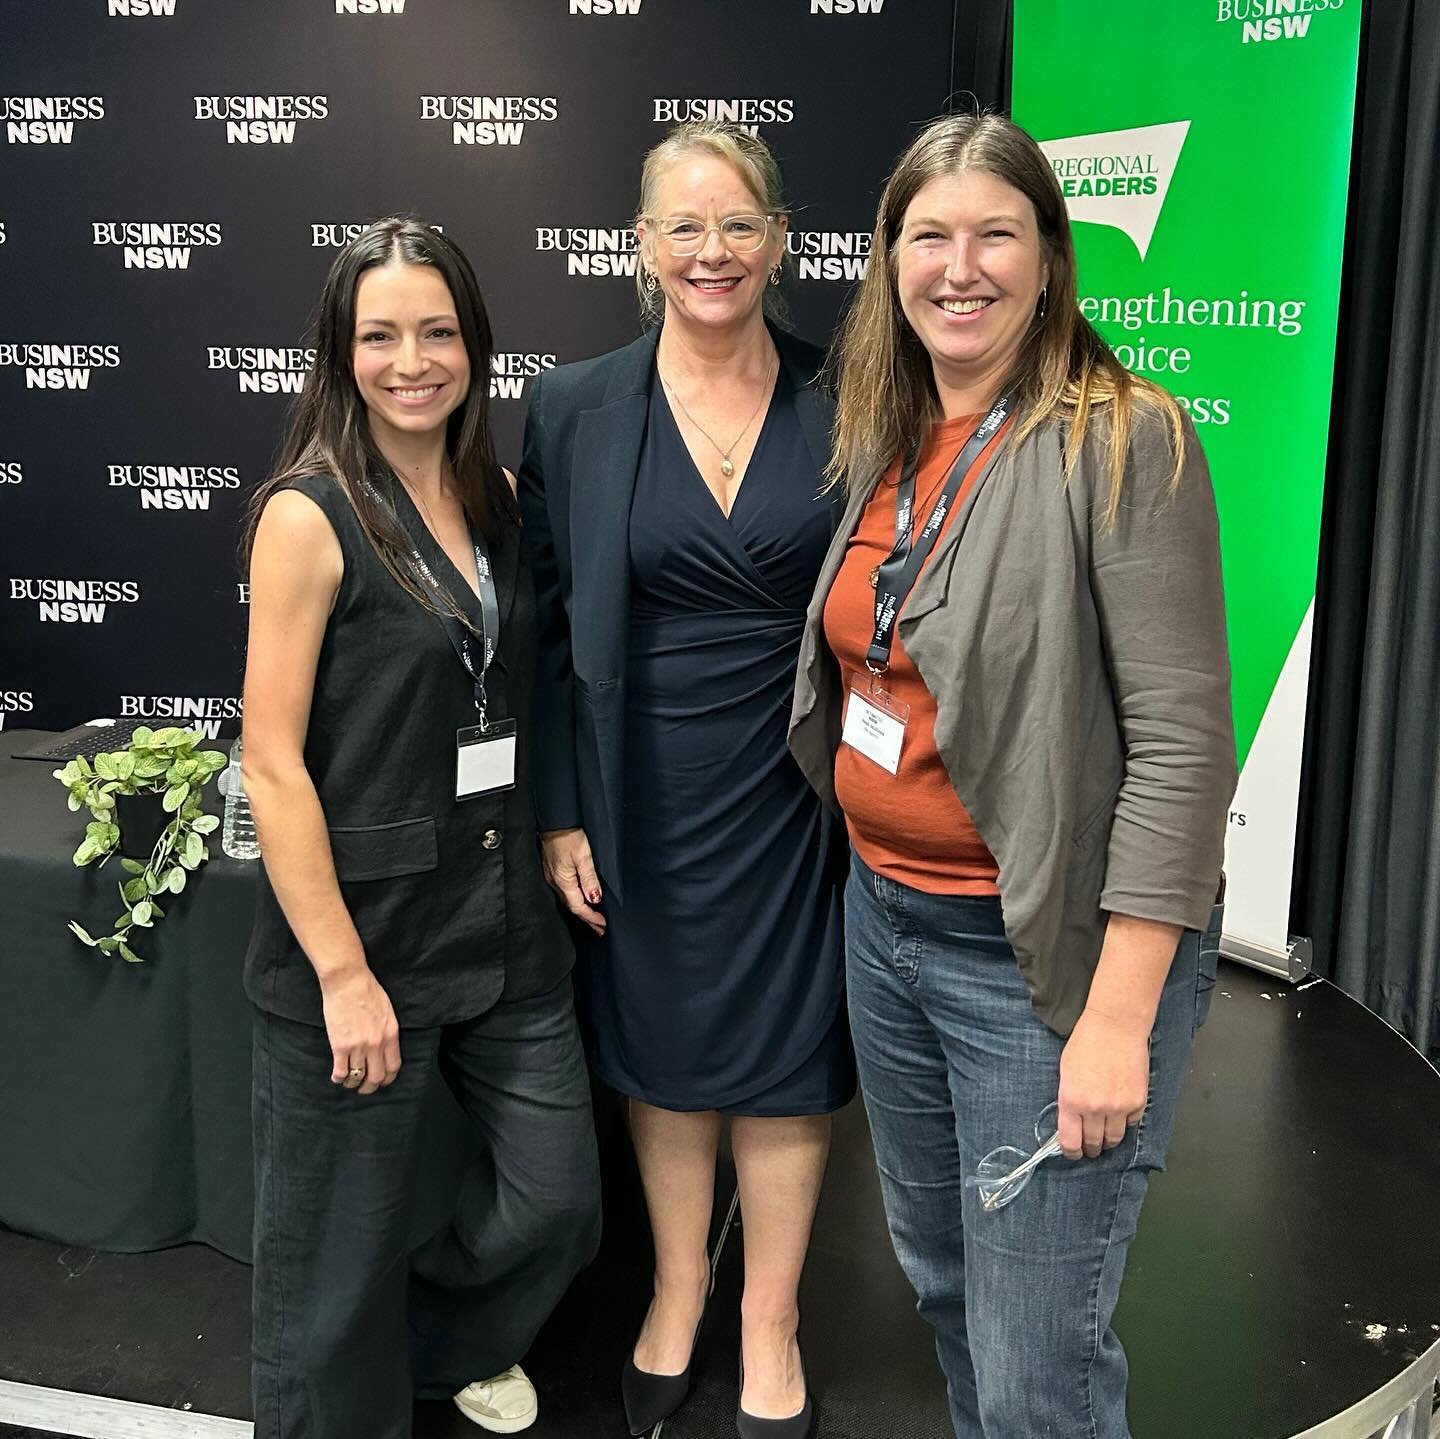 Leading the way matters. 

We were thrilled to participate in the inaugural New England North West Regional Leadership Summit, hosted by @business_nsw.

Bringing together leaders from our region for two days of keynote addresses, panel discussions, n